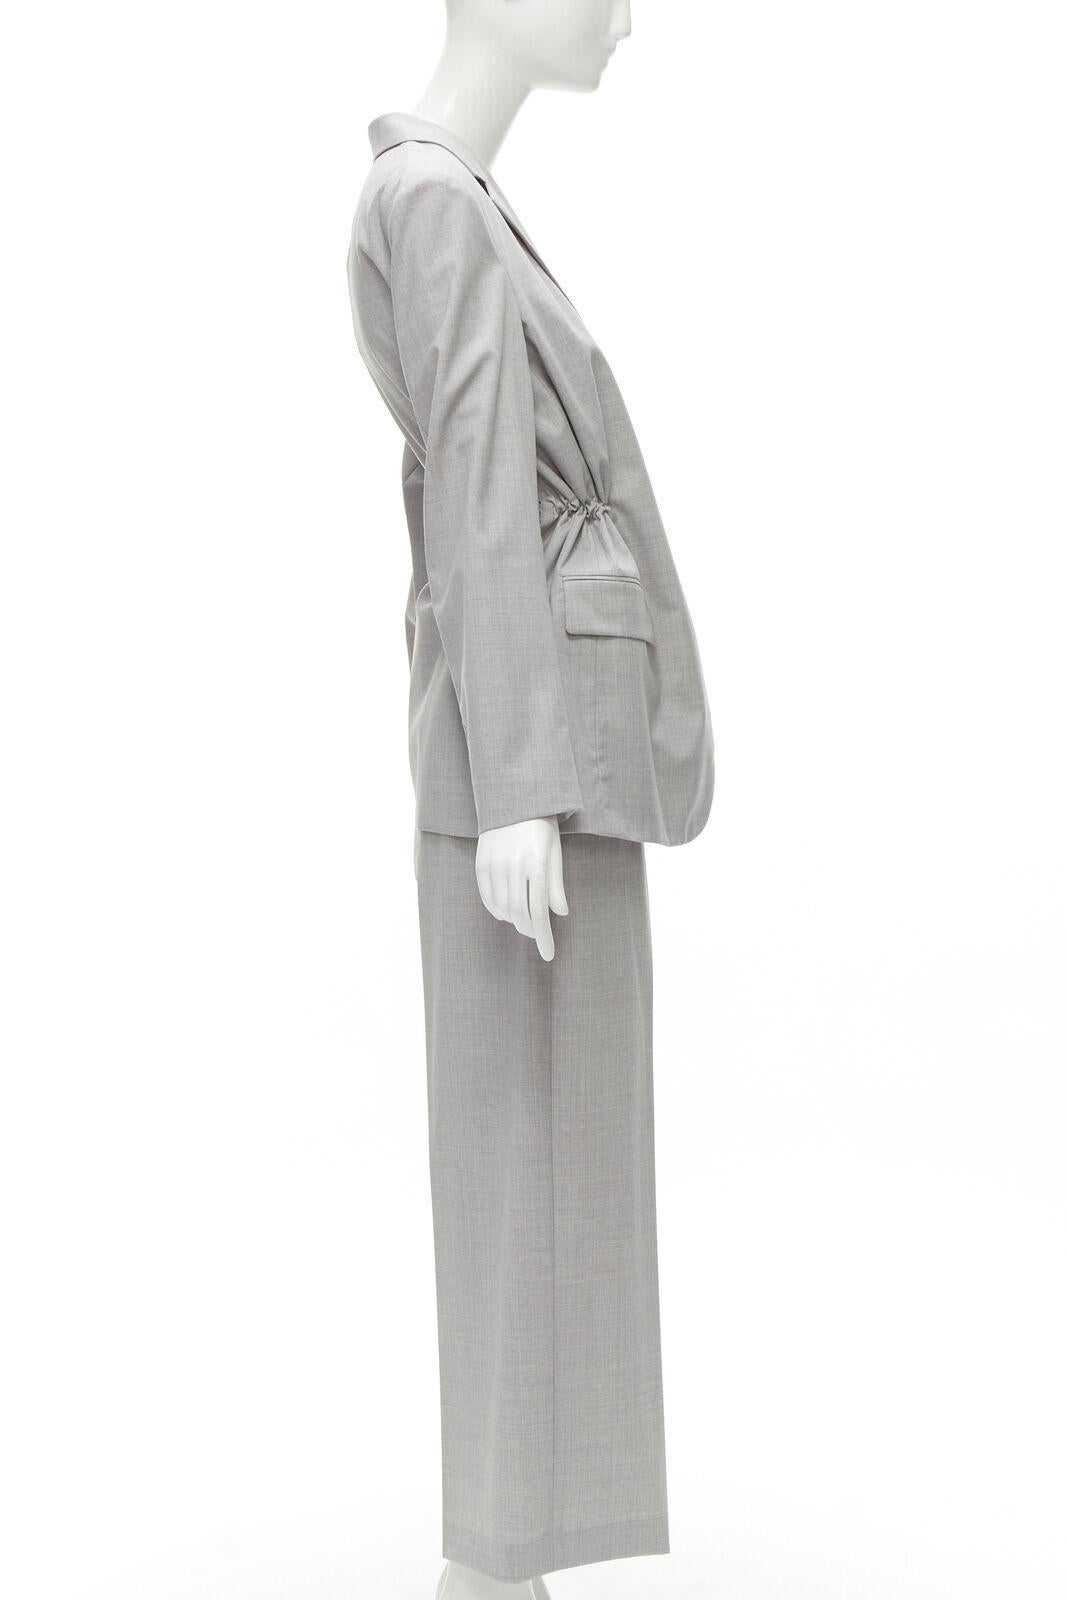 THEORY Drape wool grey drawstring cinched waist blazer wide leg pants set US6 S In Excellent Condition For Sale In Hong Kong, NT